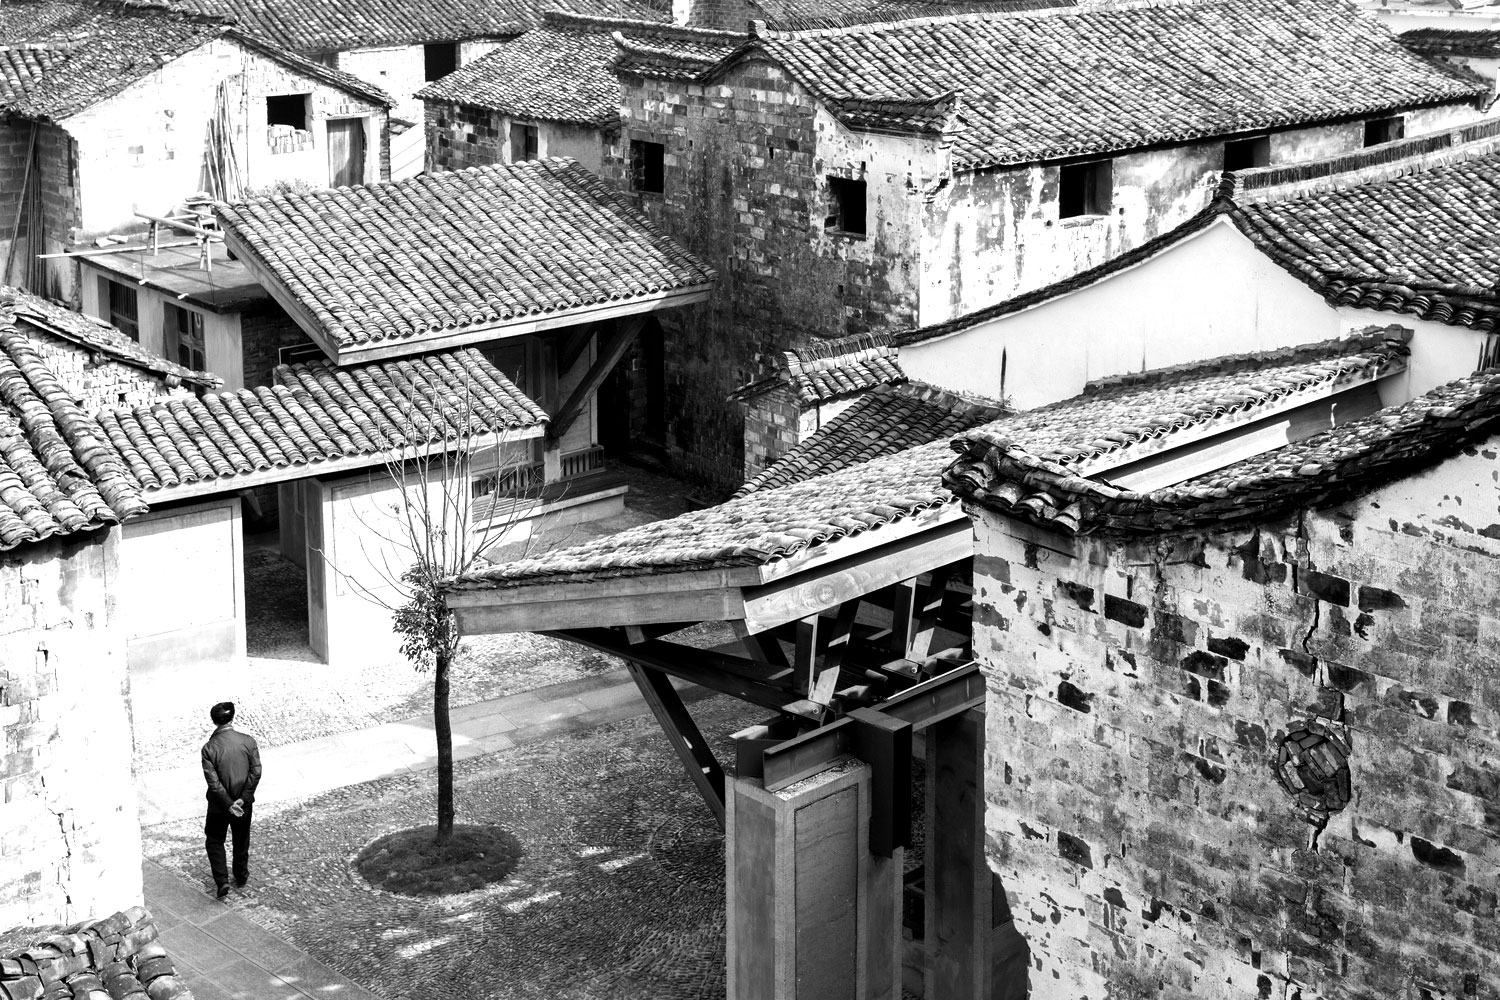 Black and white photograph of buildings and a courtyard from above